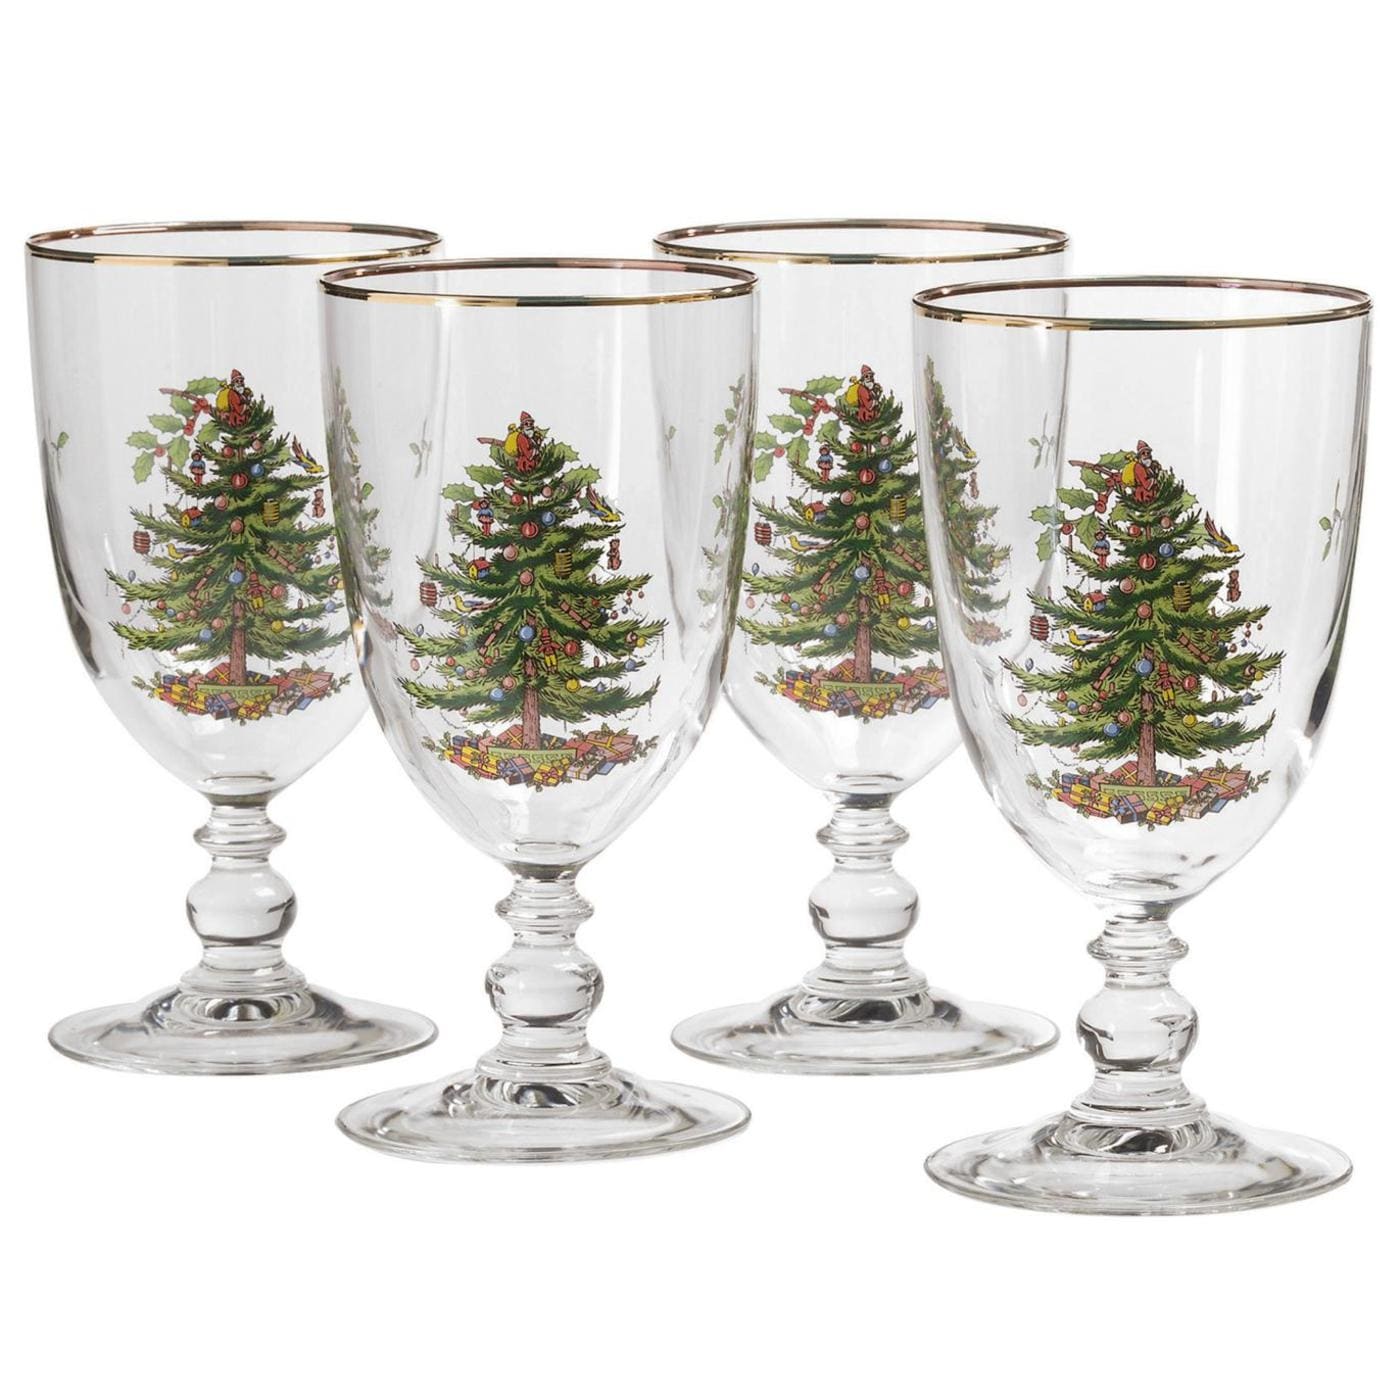 https://ak1.ostkcdn.com/images/products/is/images/direct/730b11f25b2f683fd167980c6a9df880583e303f/Spode-Christmas-Tree-Pedestal-Goblets-Set-of-4.jpg